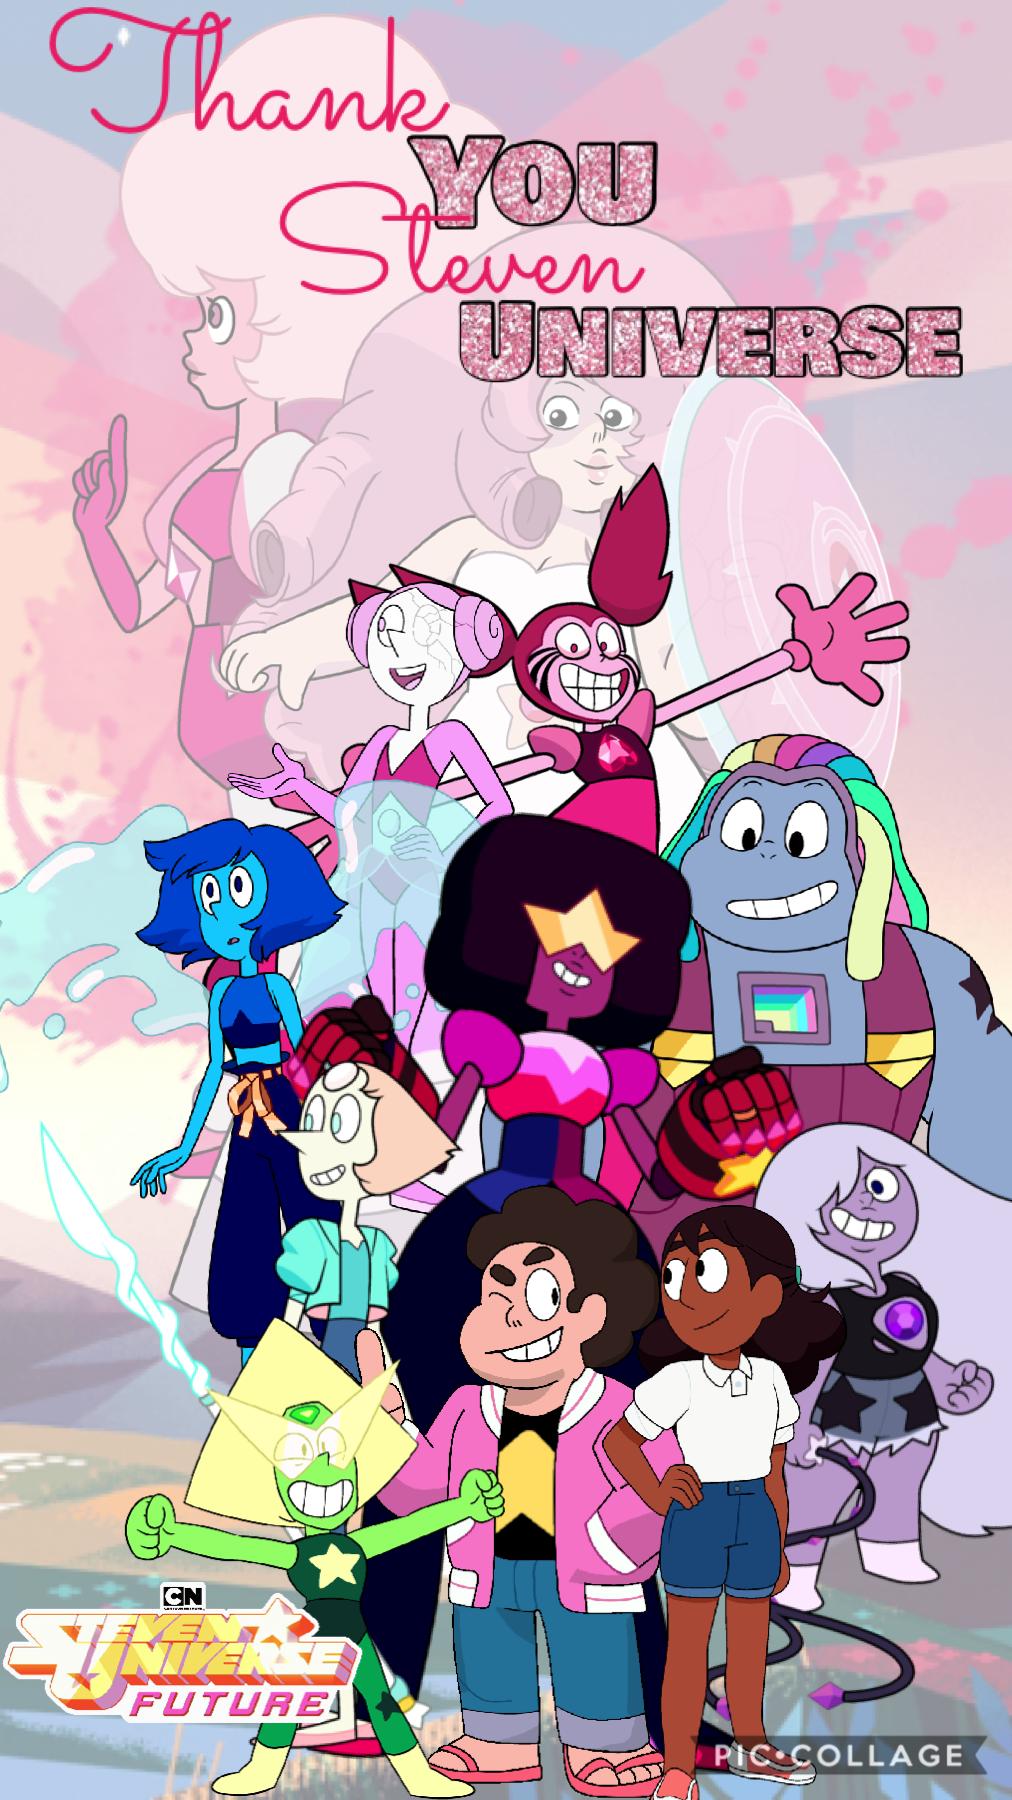 I’m going to miss Steven Universe⭐️